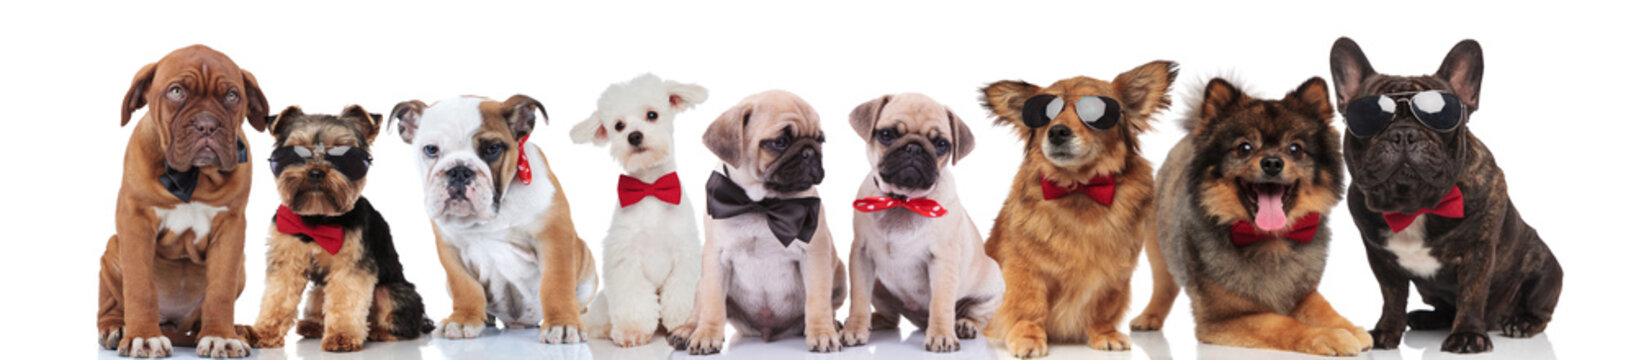 cute group of many adorable dogs wearing bowties